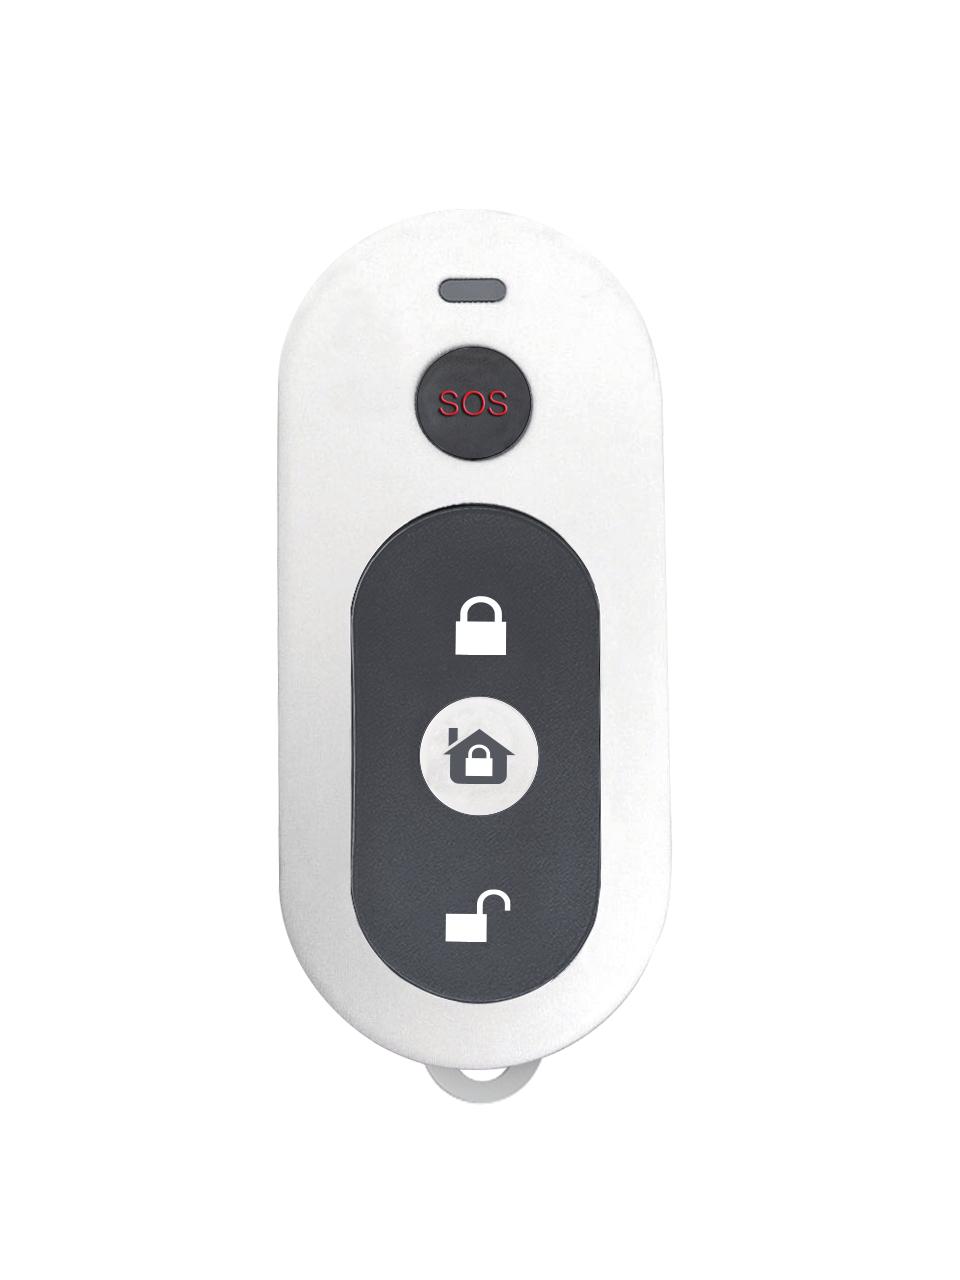 Using the Alarm unit Remote Control Bell button: triggers a loud emergency alarm Away button: activate the Alarm unit Disarm: deactivate the Alarm unit Switch Voice: Switch from Chime to Siren and